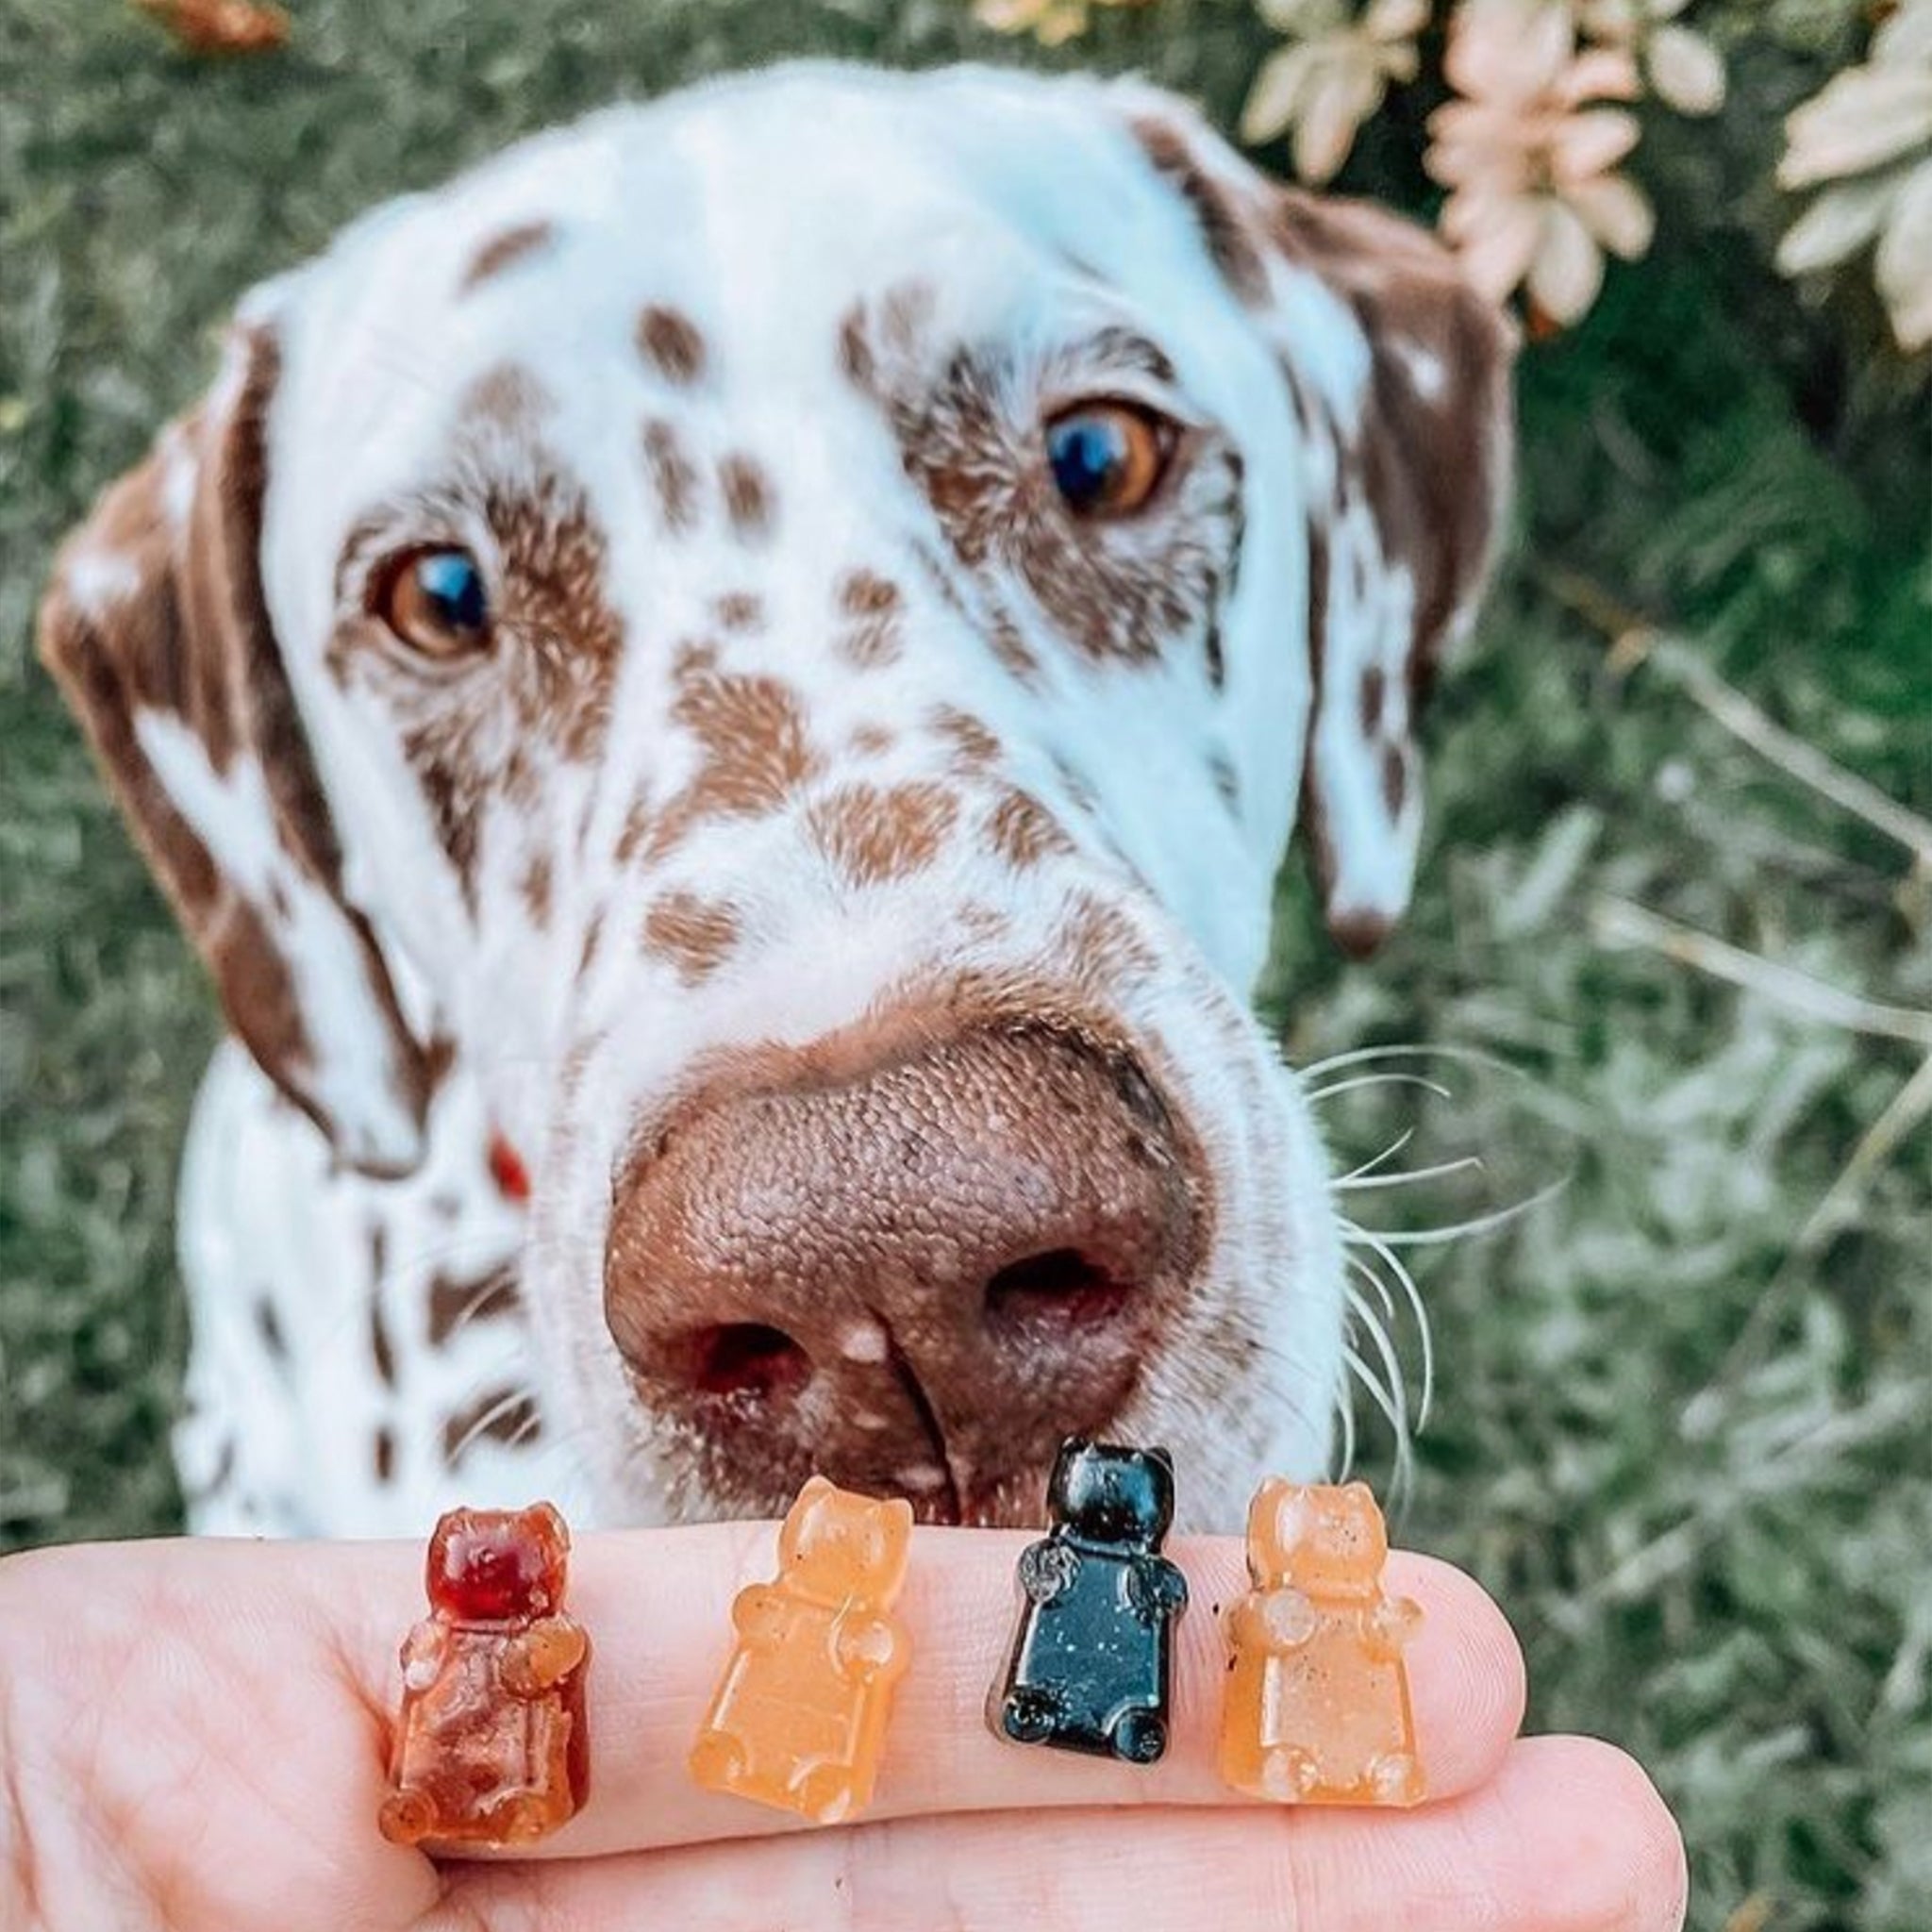 can dogs eat gummy bears